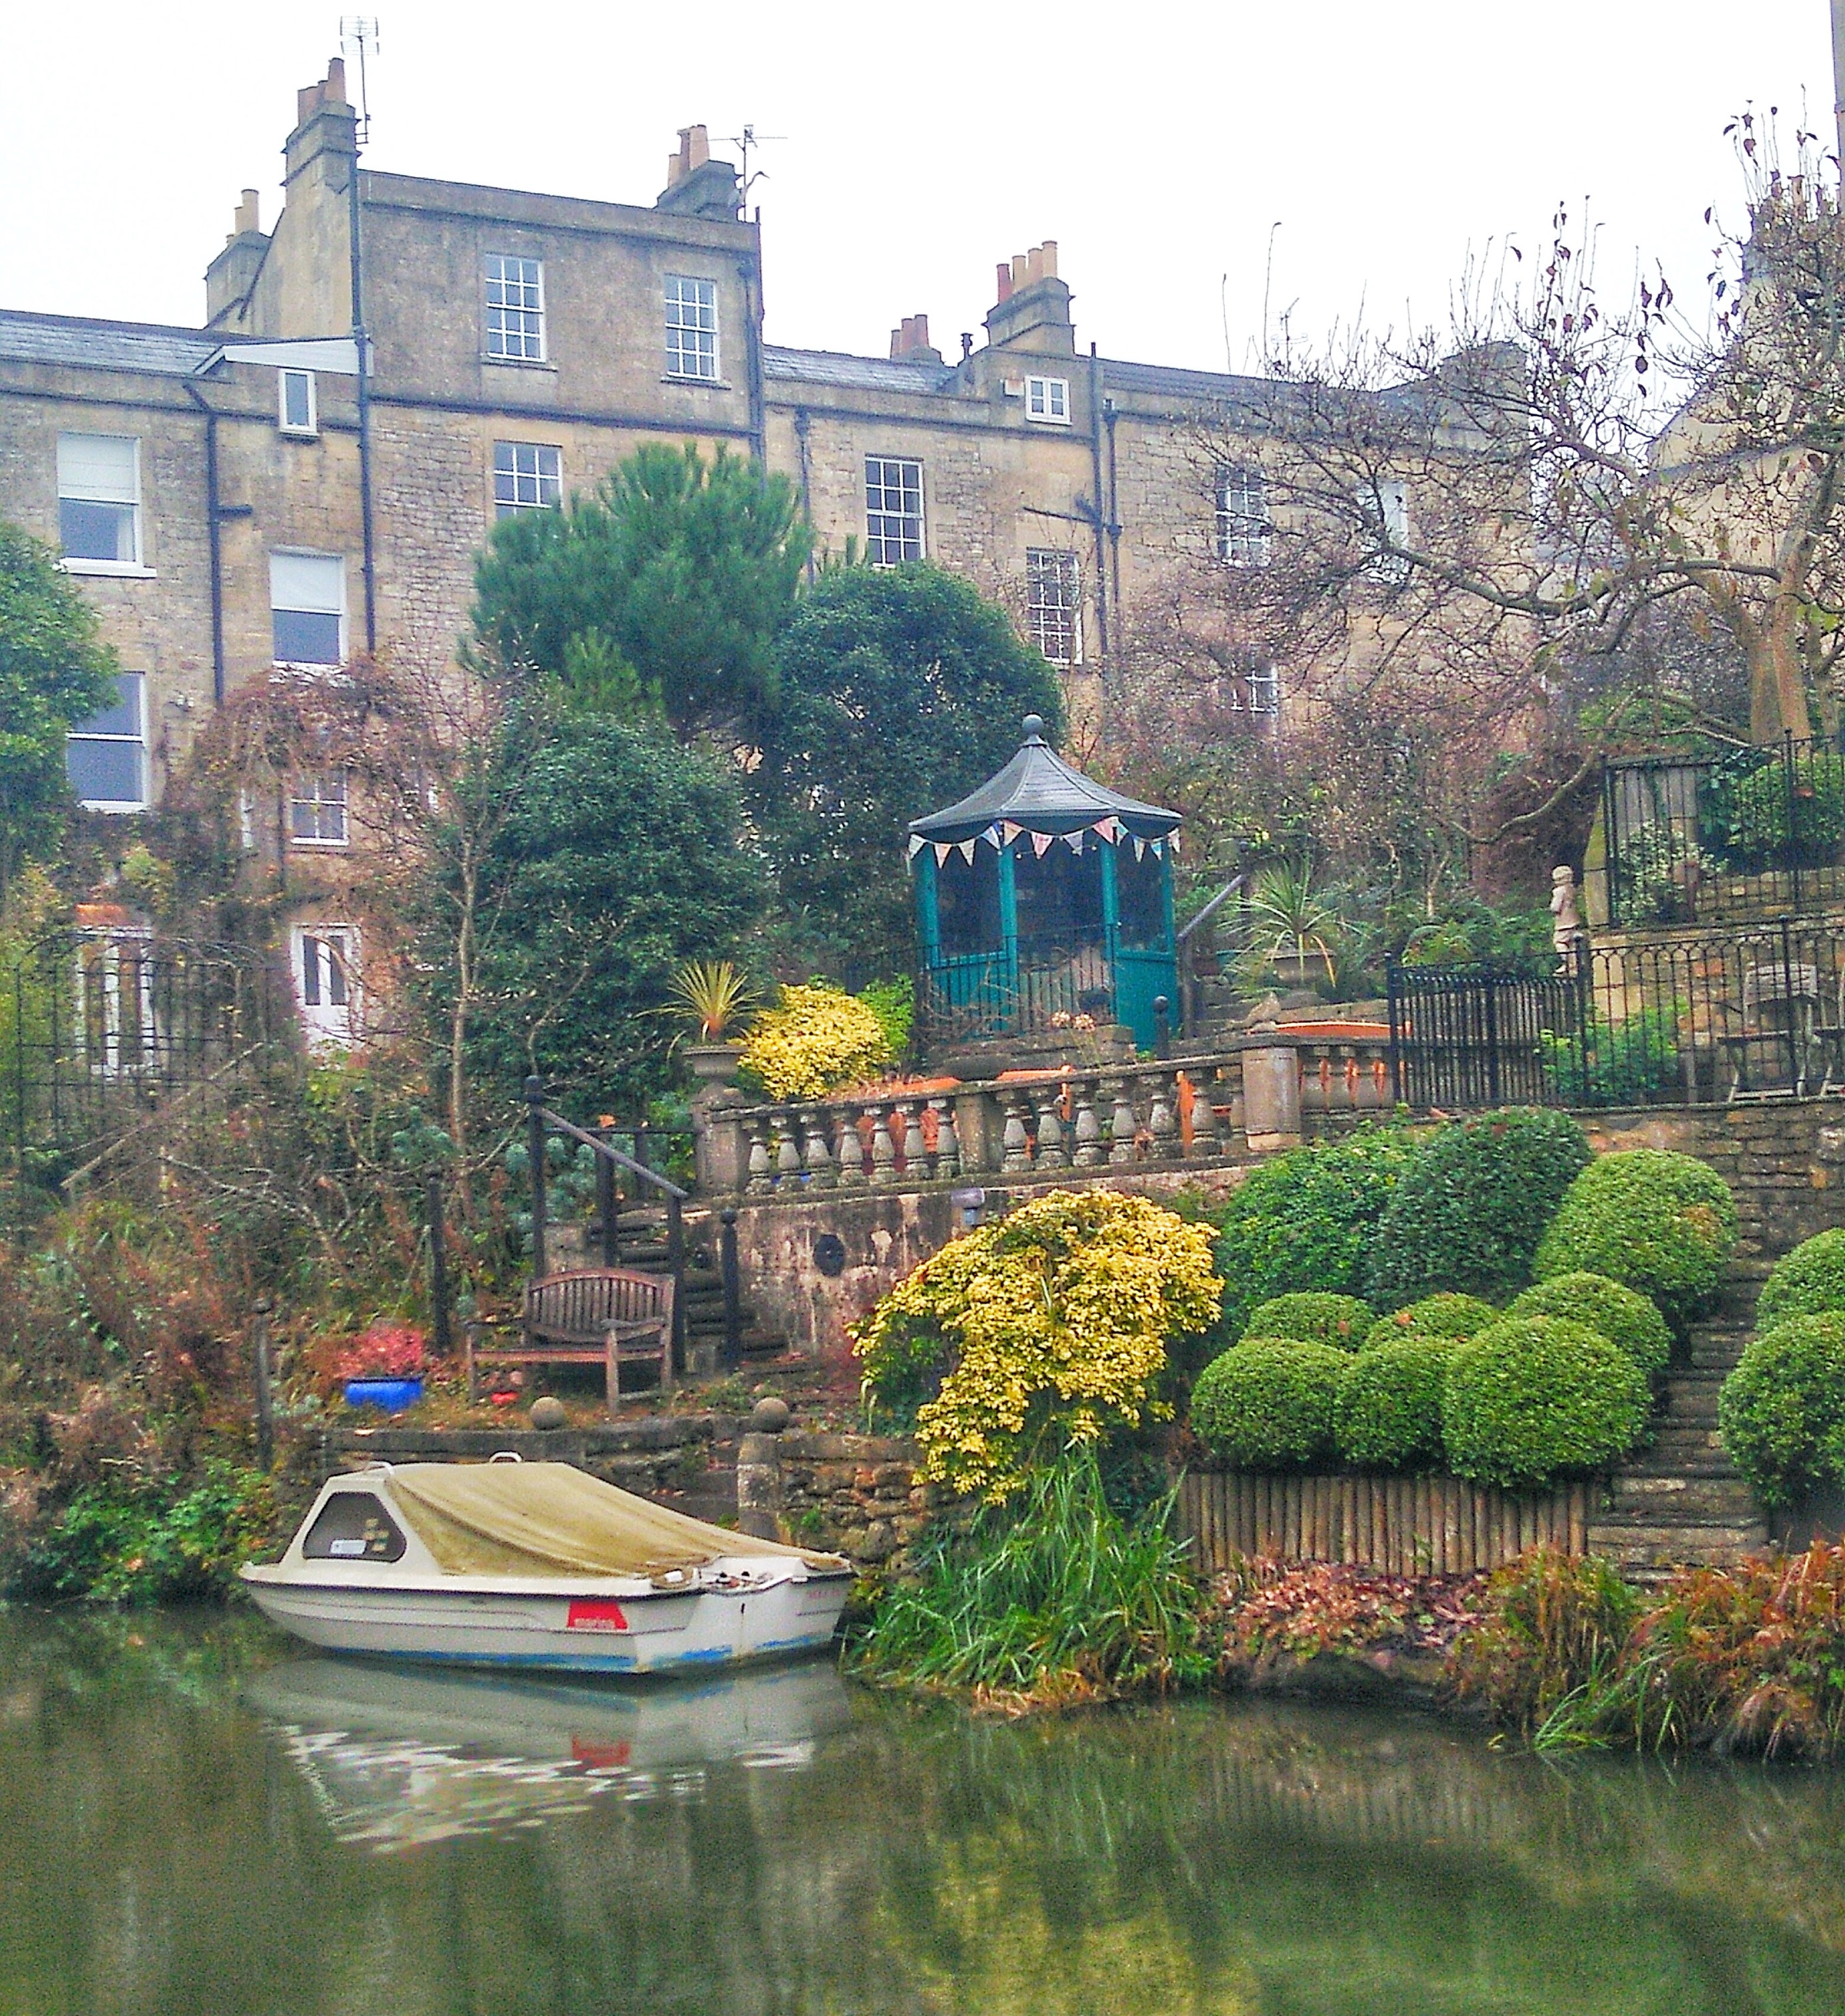 Canals in Bath UK